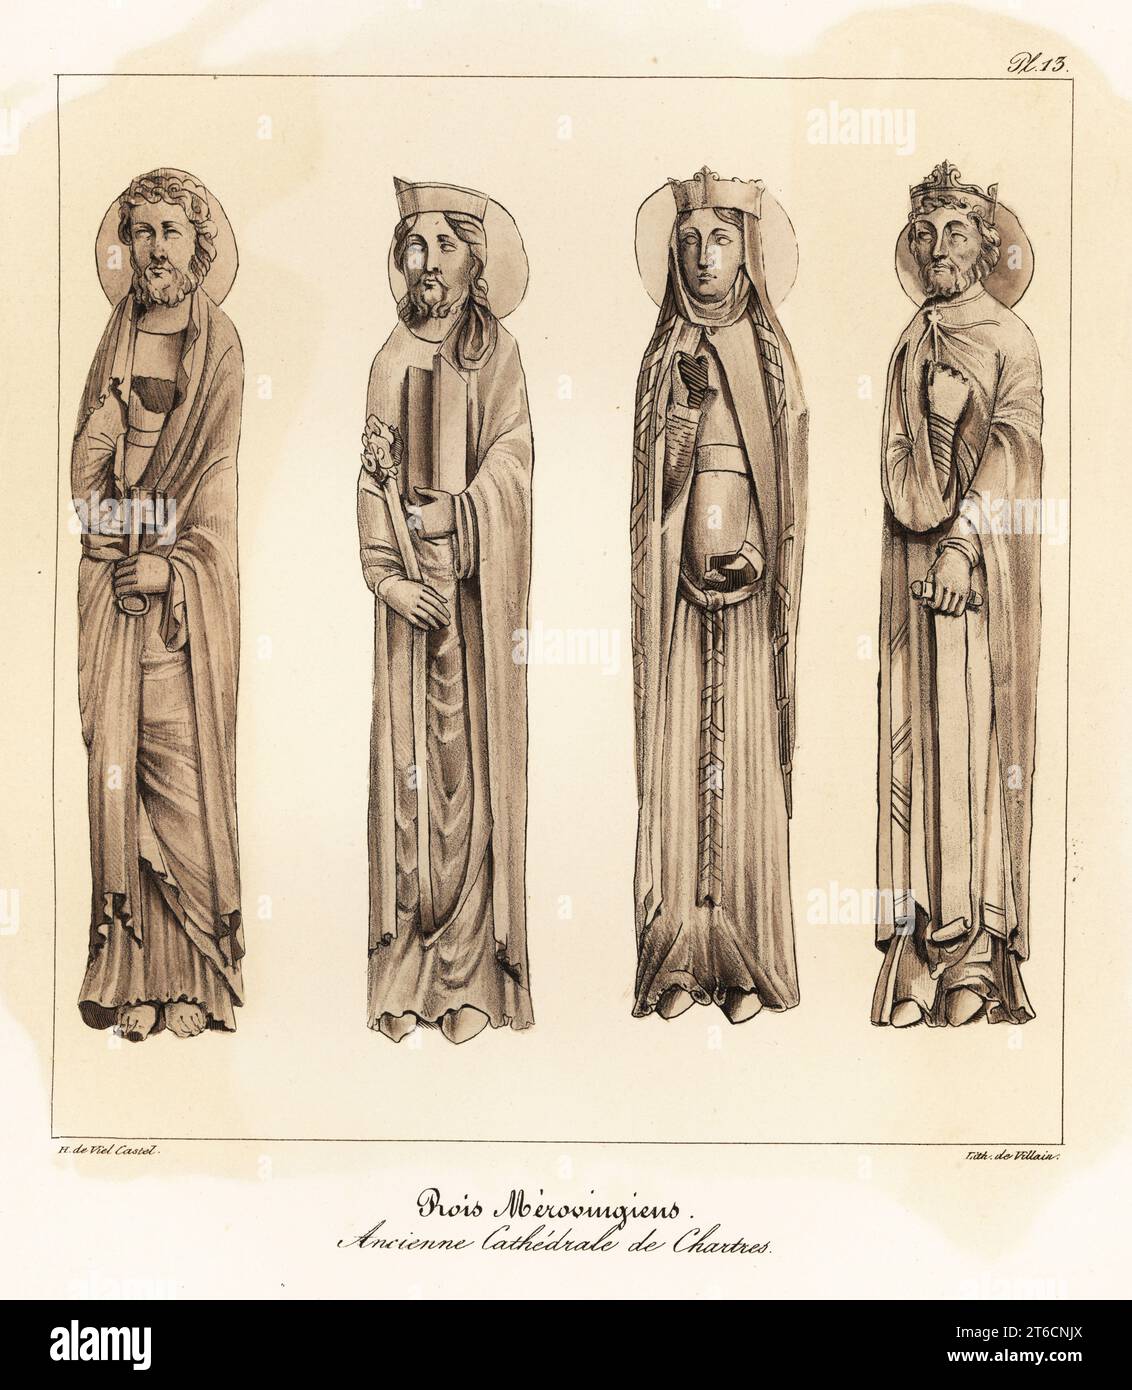 Merovingian kings and queens from the jambs of the Royal Portal, Chartres Cathedral. Now identified as Old Testament figures. Rois Merovingiens, Ancienne Cathedrale de Chartres. Tinted lithograph by Villain after an illustration by Horace de Viel-Castel from his Collection des costumes, armes et meubles pour servir à l'histoire de la France (Collection of costumes, weapons and furniture to be used in the history of France), Treuttel & Wurtz, Bossange, 1827. Stock Photo